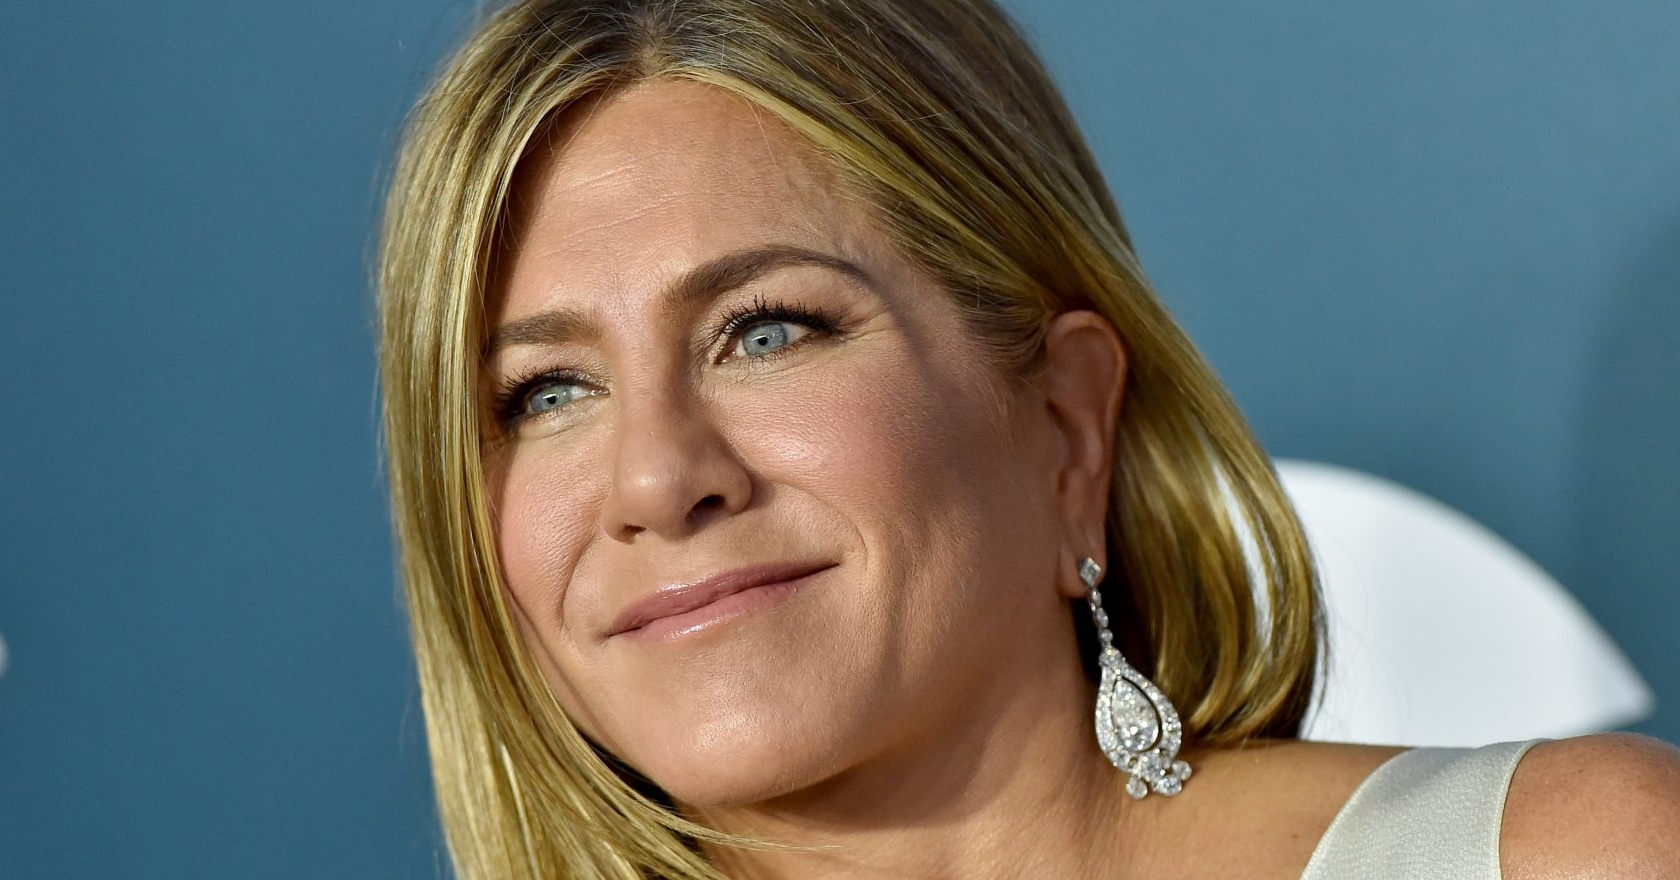 Which famous actress starred alongside Jennifer Aniston in the movie Marley & Me?